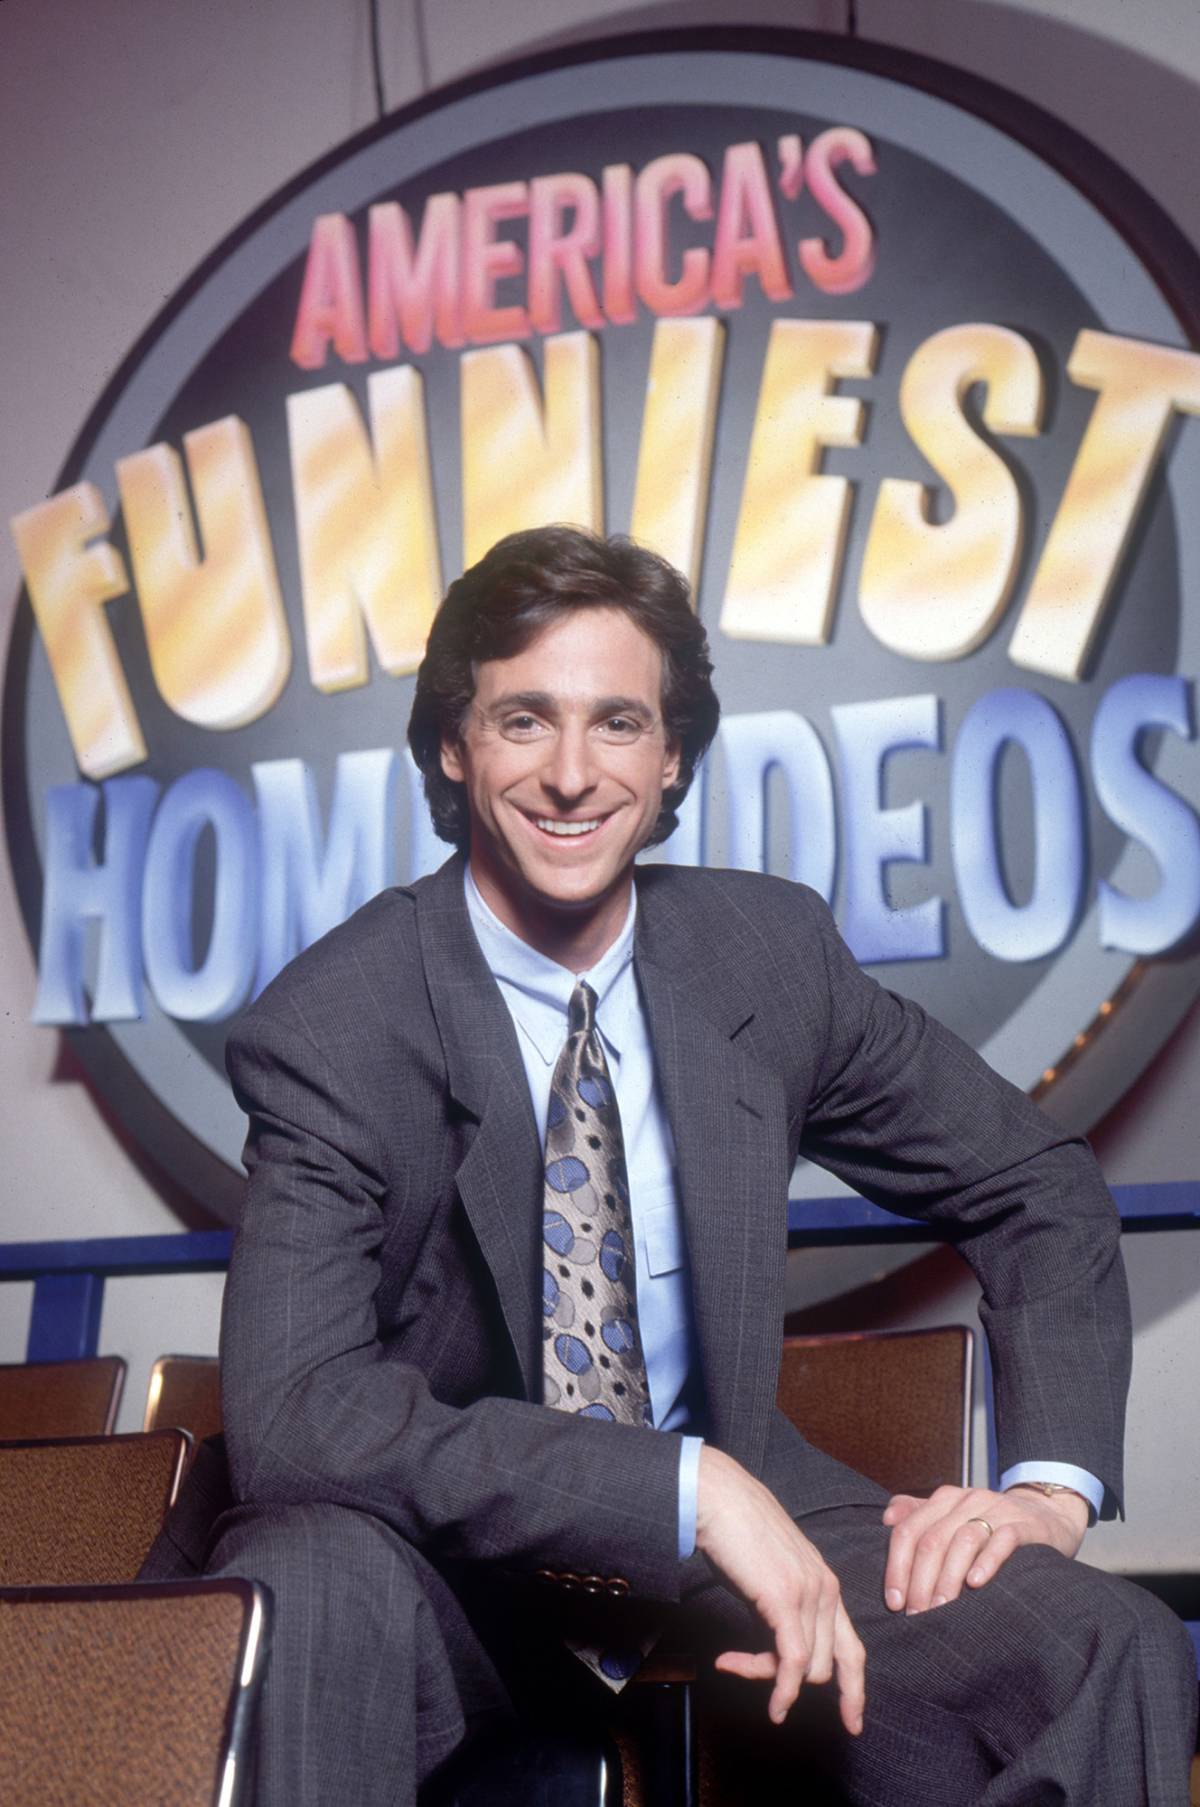 Watch: Bob Saget Tribute Airs on 'America's Funniest Home Videos'